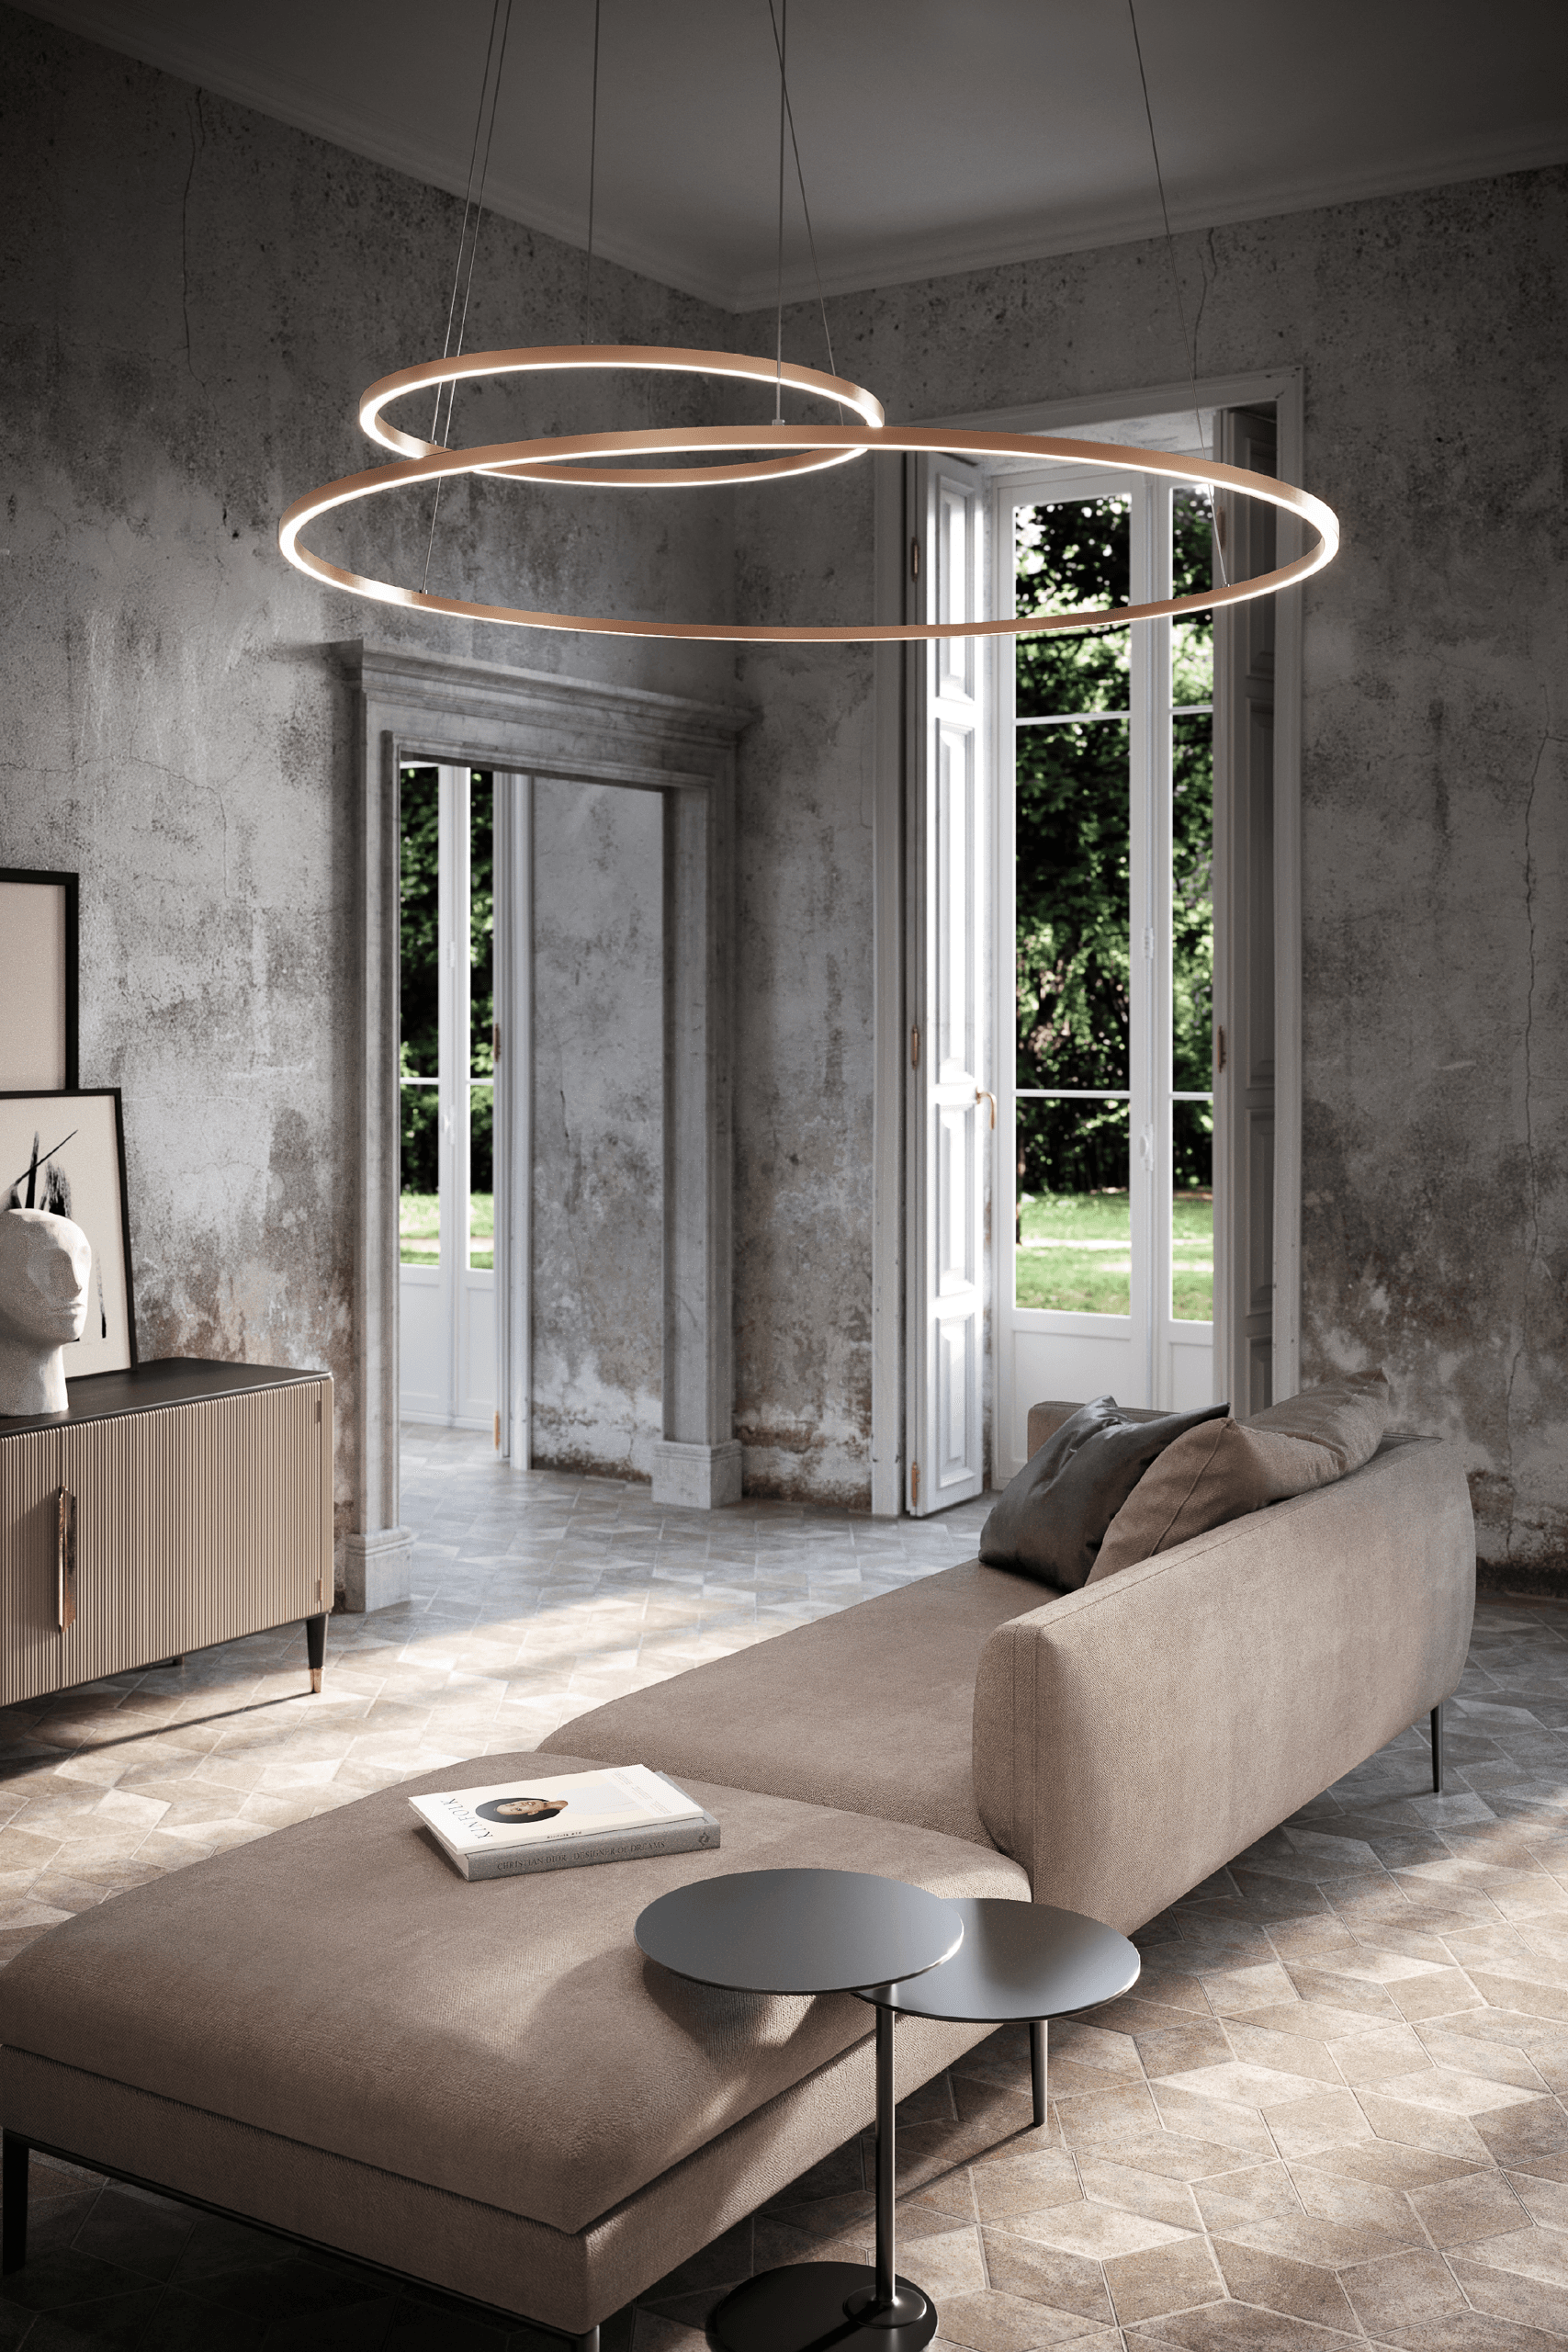 Gallery Product Tour Slim Suspension Light Linealightgroup 1280X1920 4